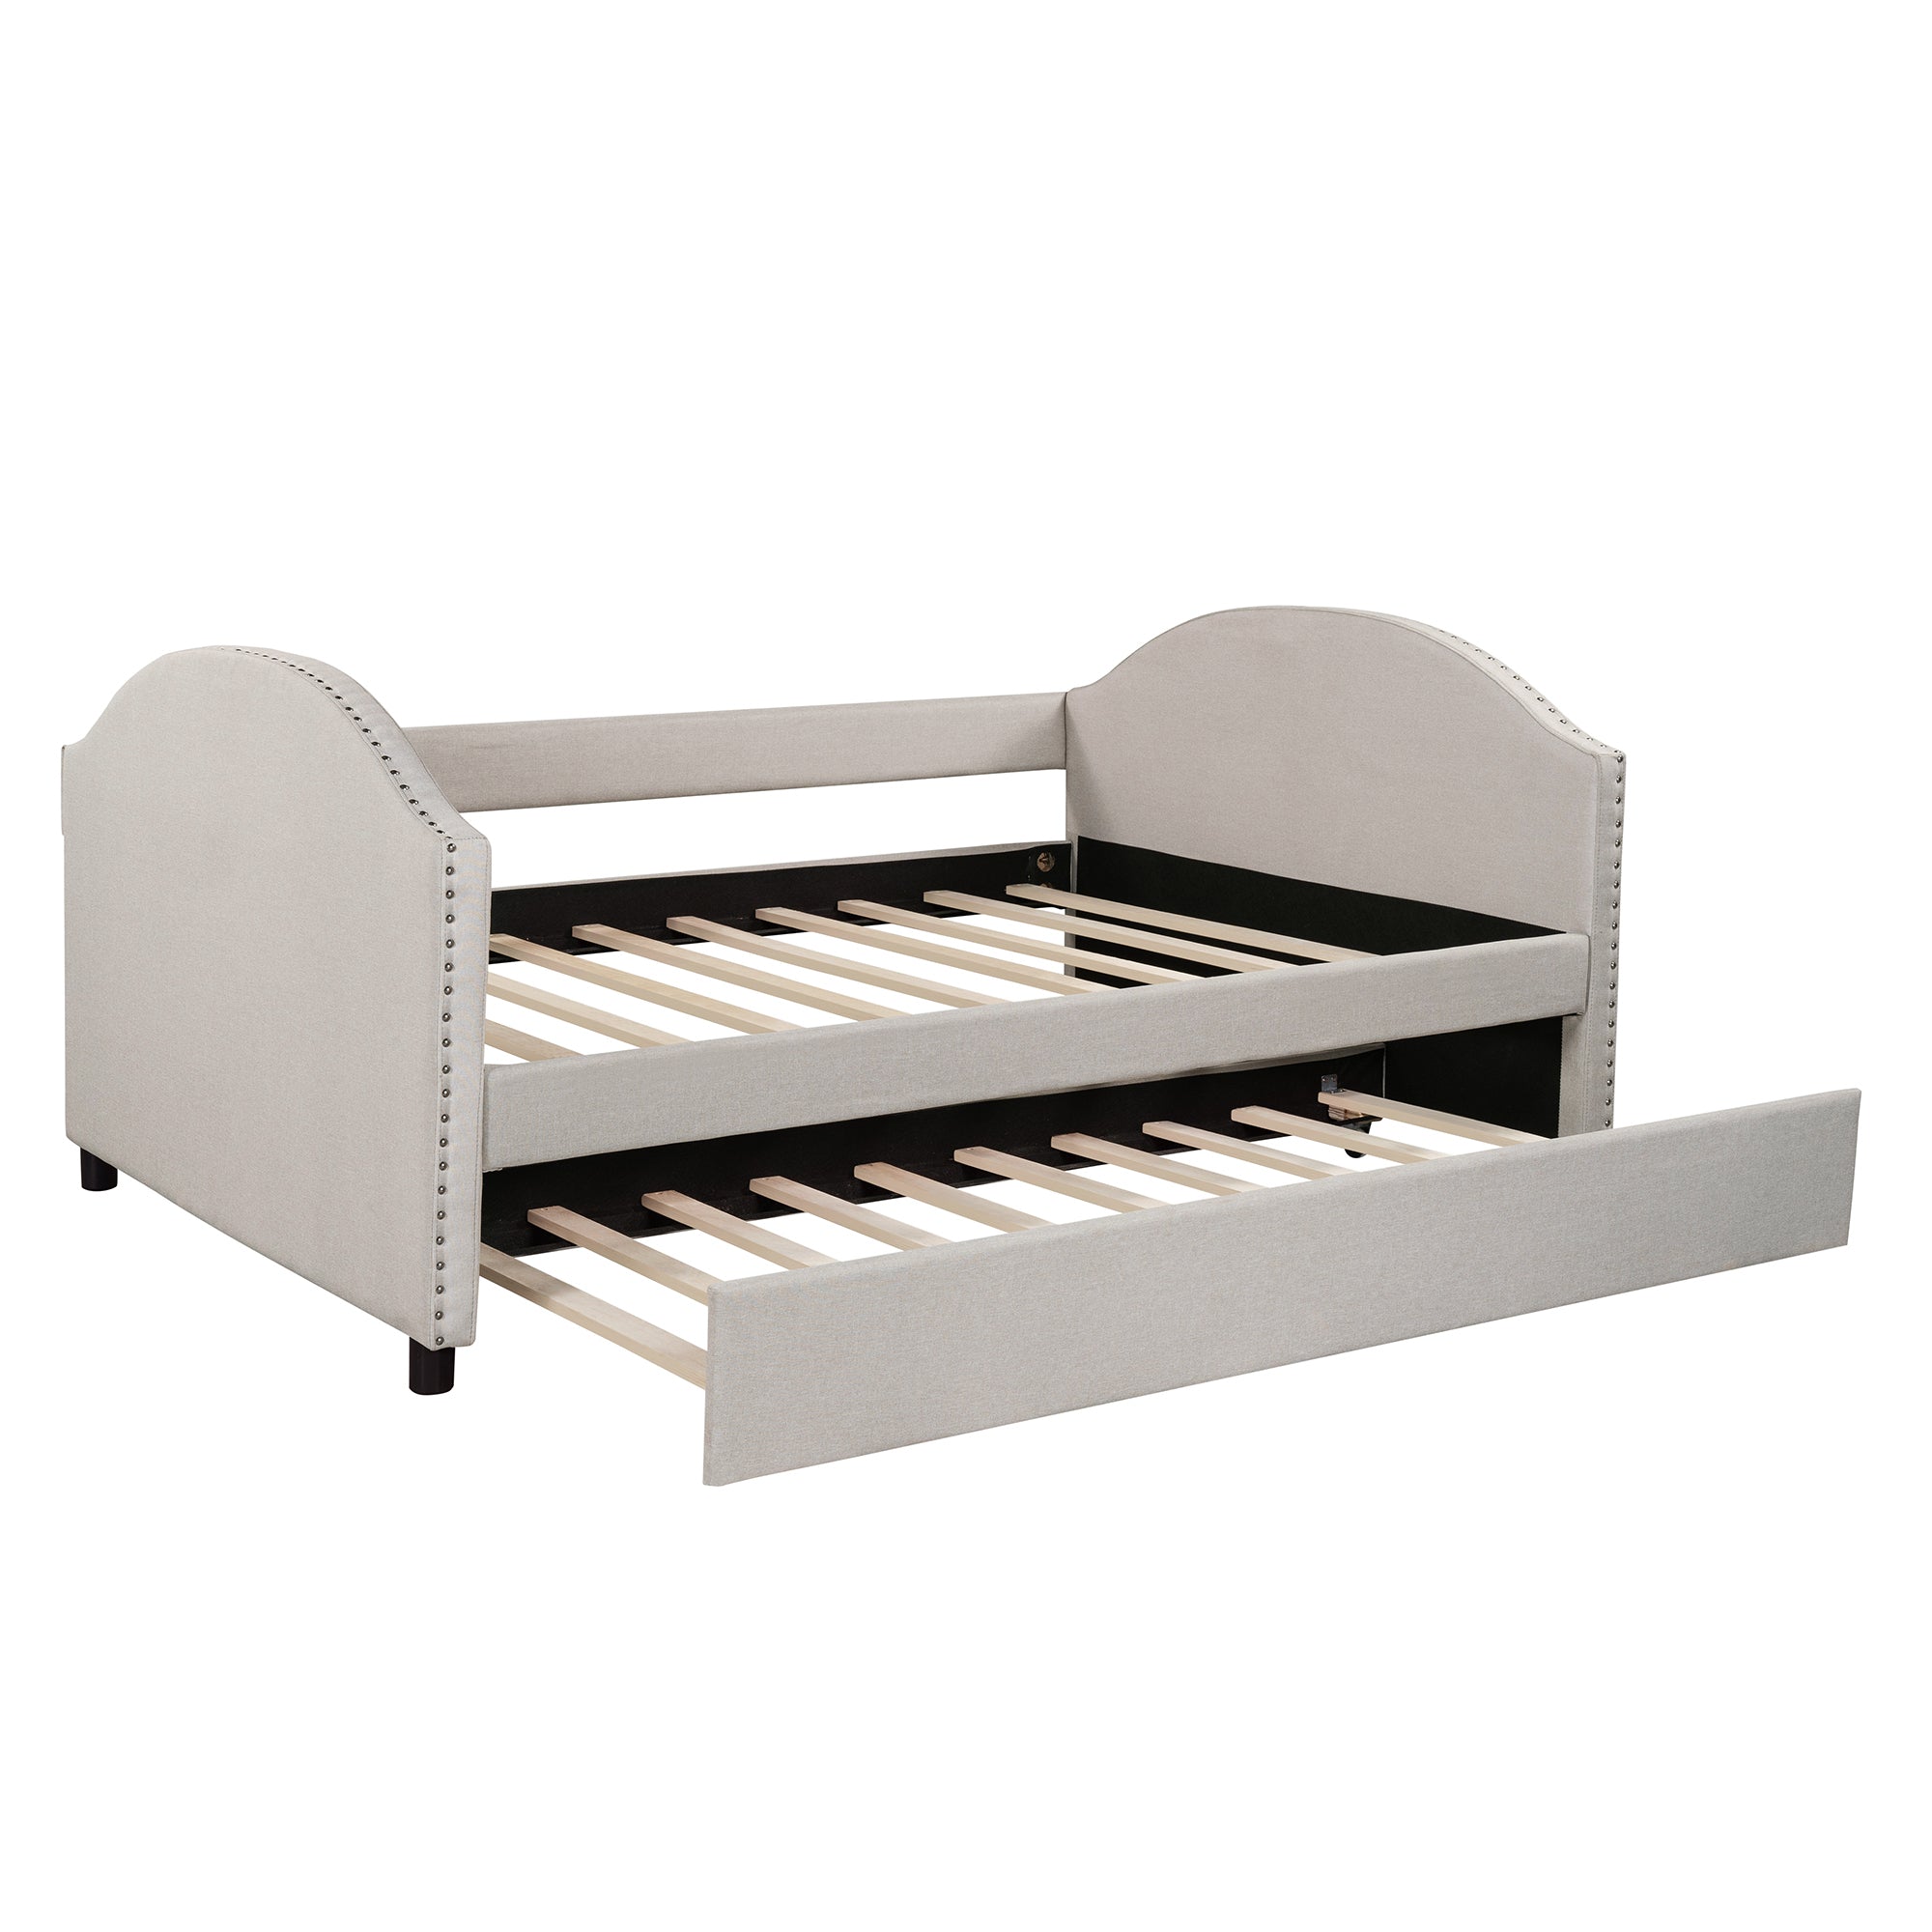 Full size Upholstered Daybed with Twin Size Trundle (Beige)